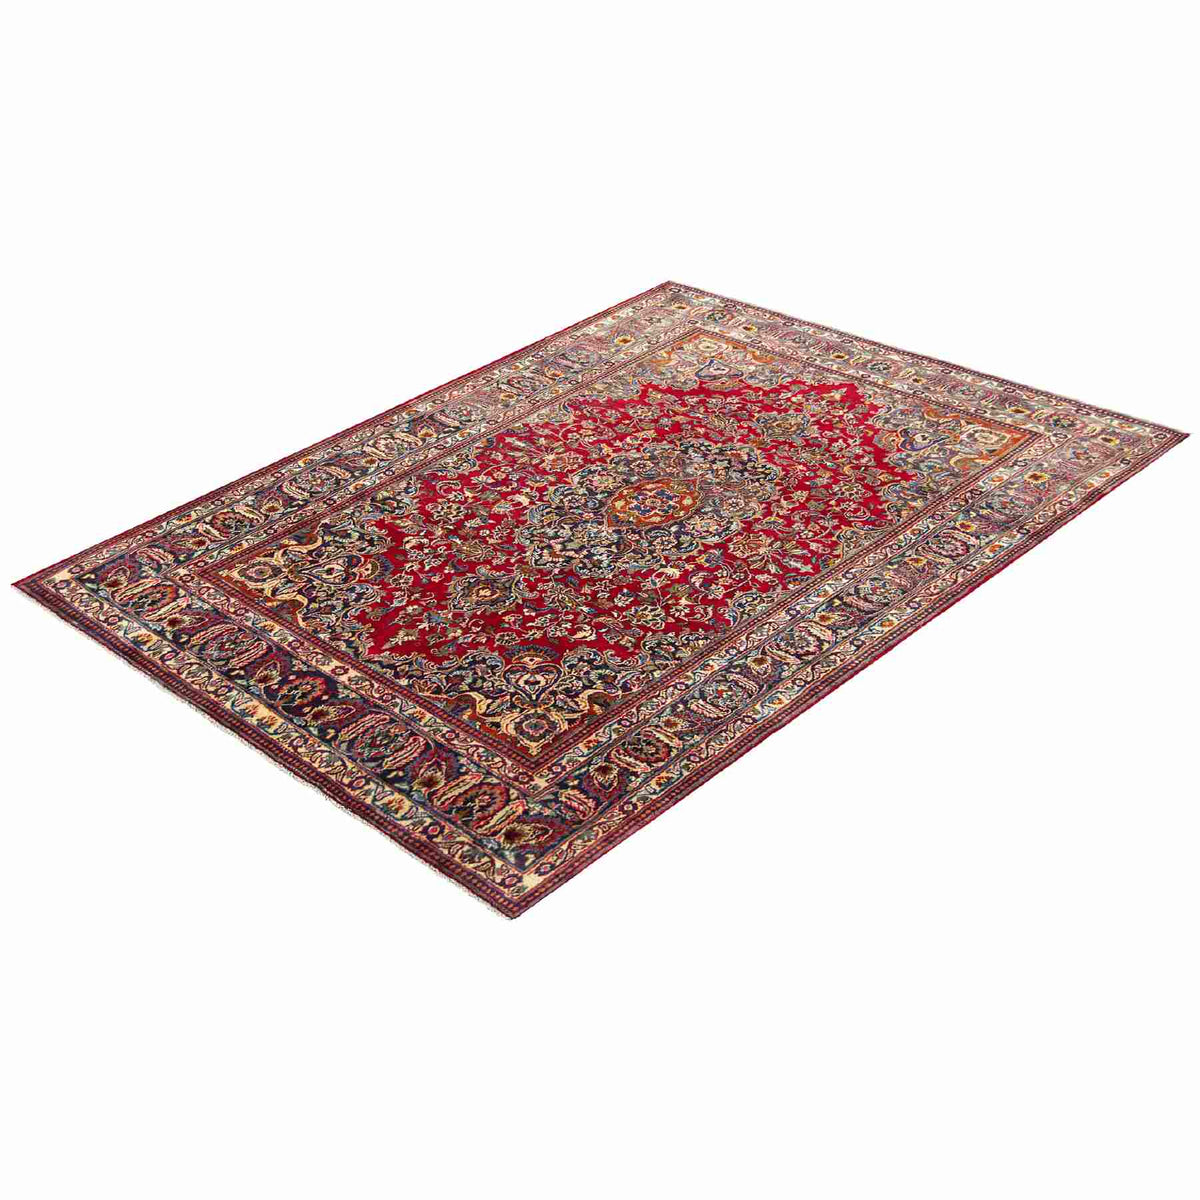 Fine Hand-knotted Wool Vintage Persian Rug 180cm x 286cm